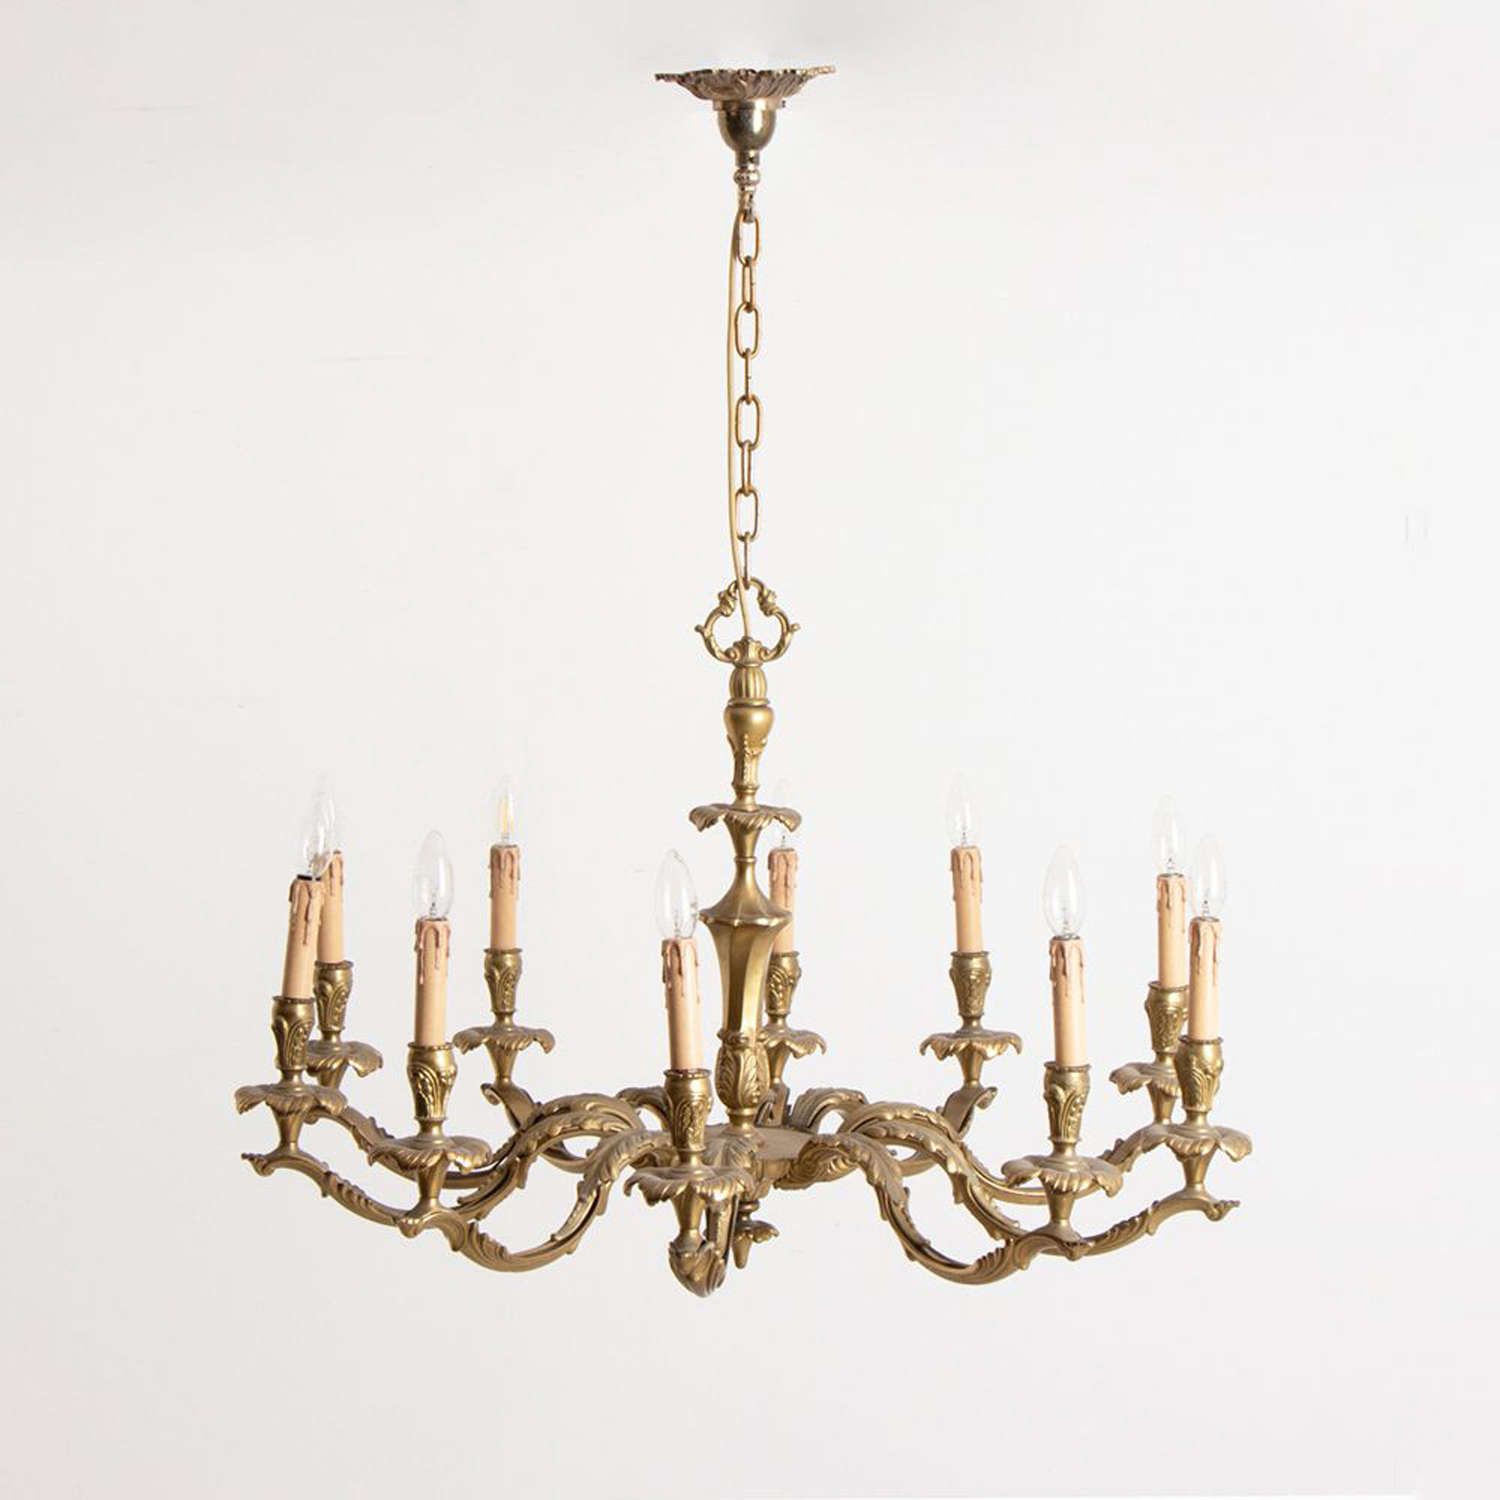 A large 19thC solid brass 10 branch baronial chandelier